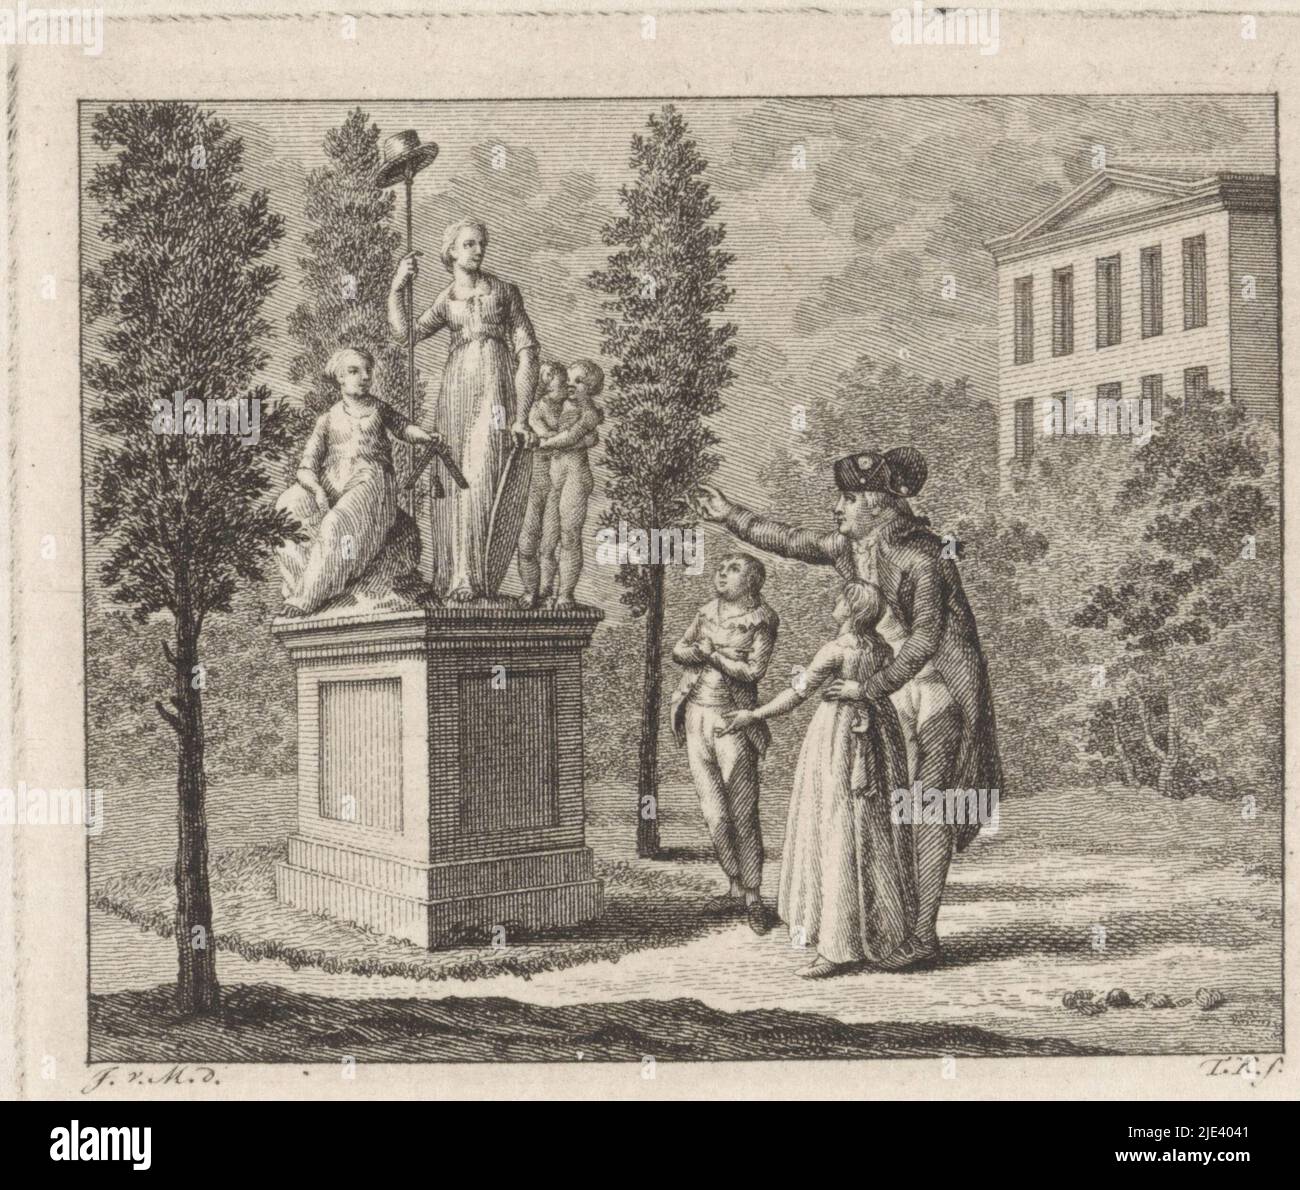 Statue of Liberty, Theodoor Koning, after Jacobus van Meurs, 1758 - 1829, In a park, a man shows a statue of Liberty to a boy and a girl. The statue is on a pied-à-terre., print maker: Theodoor Koning, (mentioned on object), Jacobus van Meurs, (mentioned on object), Amsterdam, 1758 - 1829, paper, etching, h 68 mm × w 81 mm Stock Photo